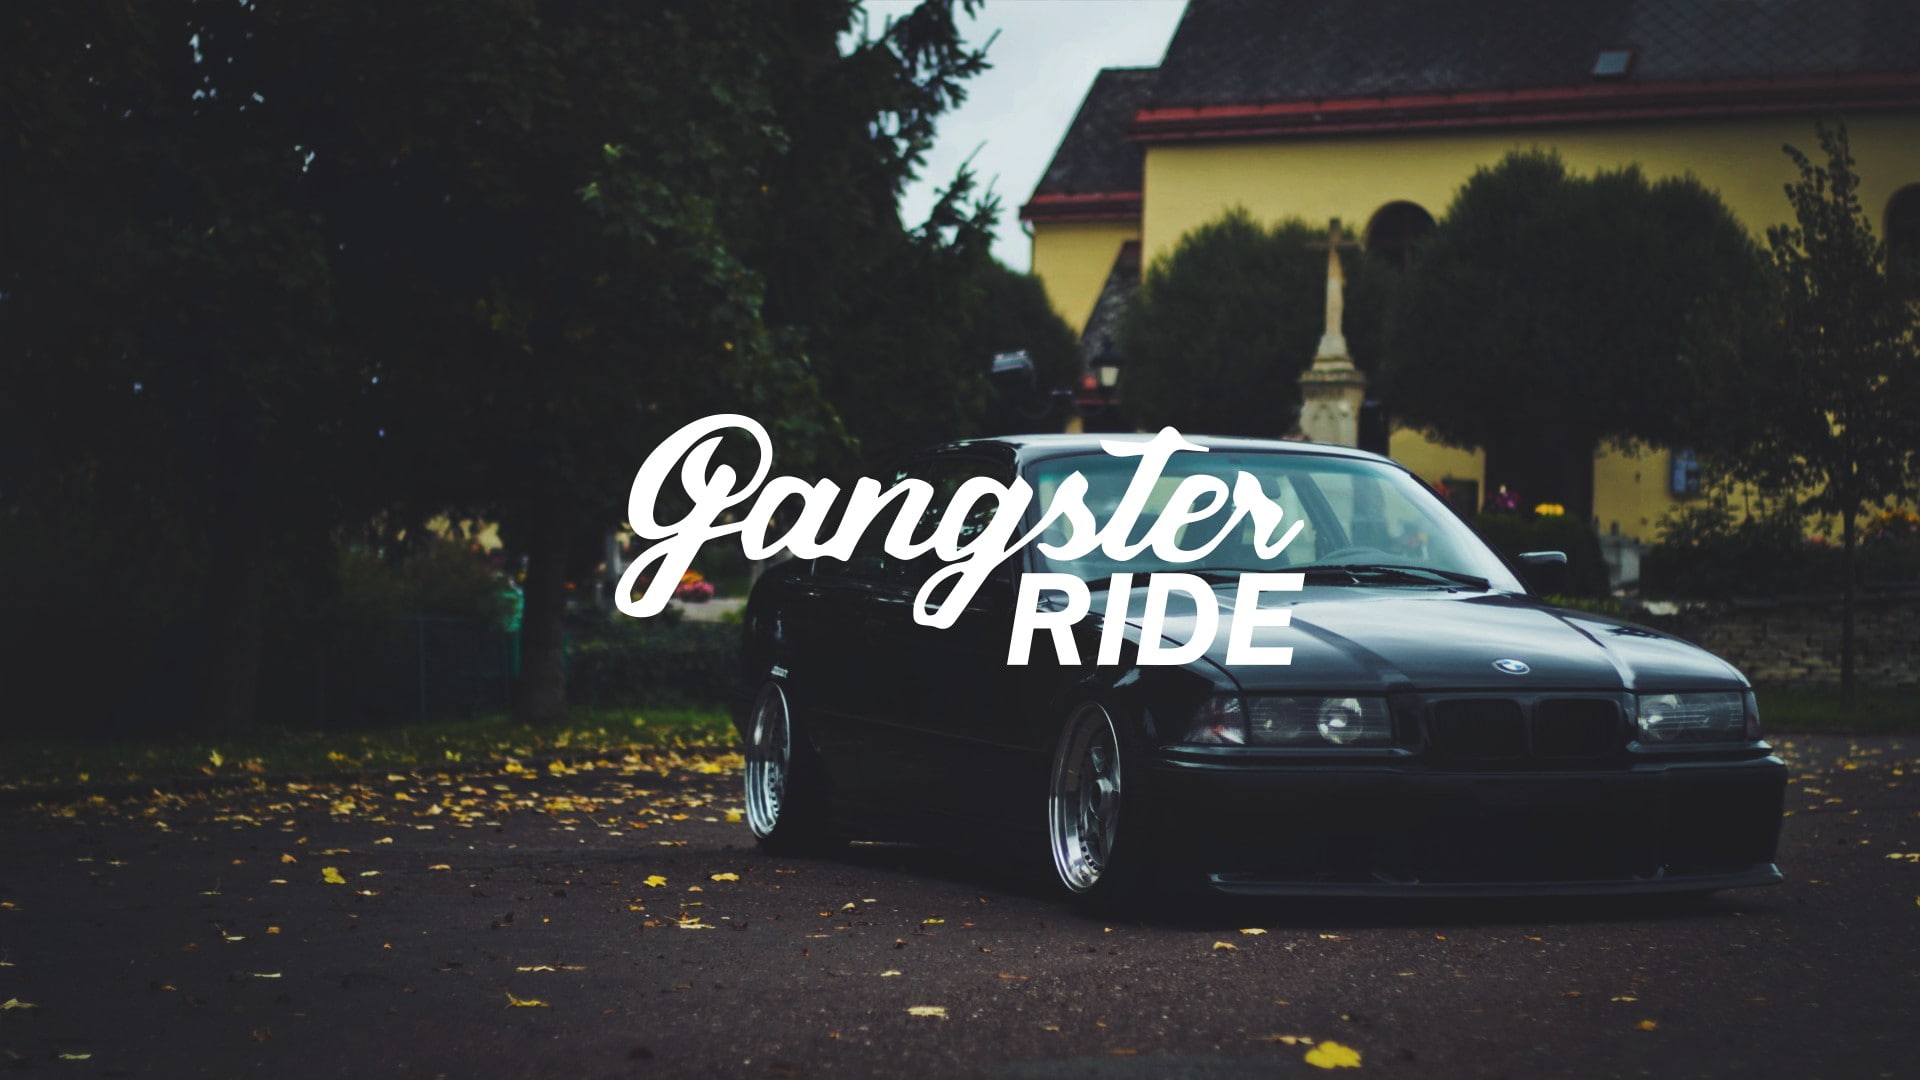 1920x1080 px bmw car Colorful GANGSTER RIDE Lowrider Tuning Animals Dolphins HD Art